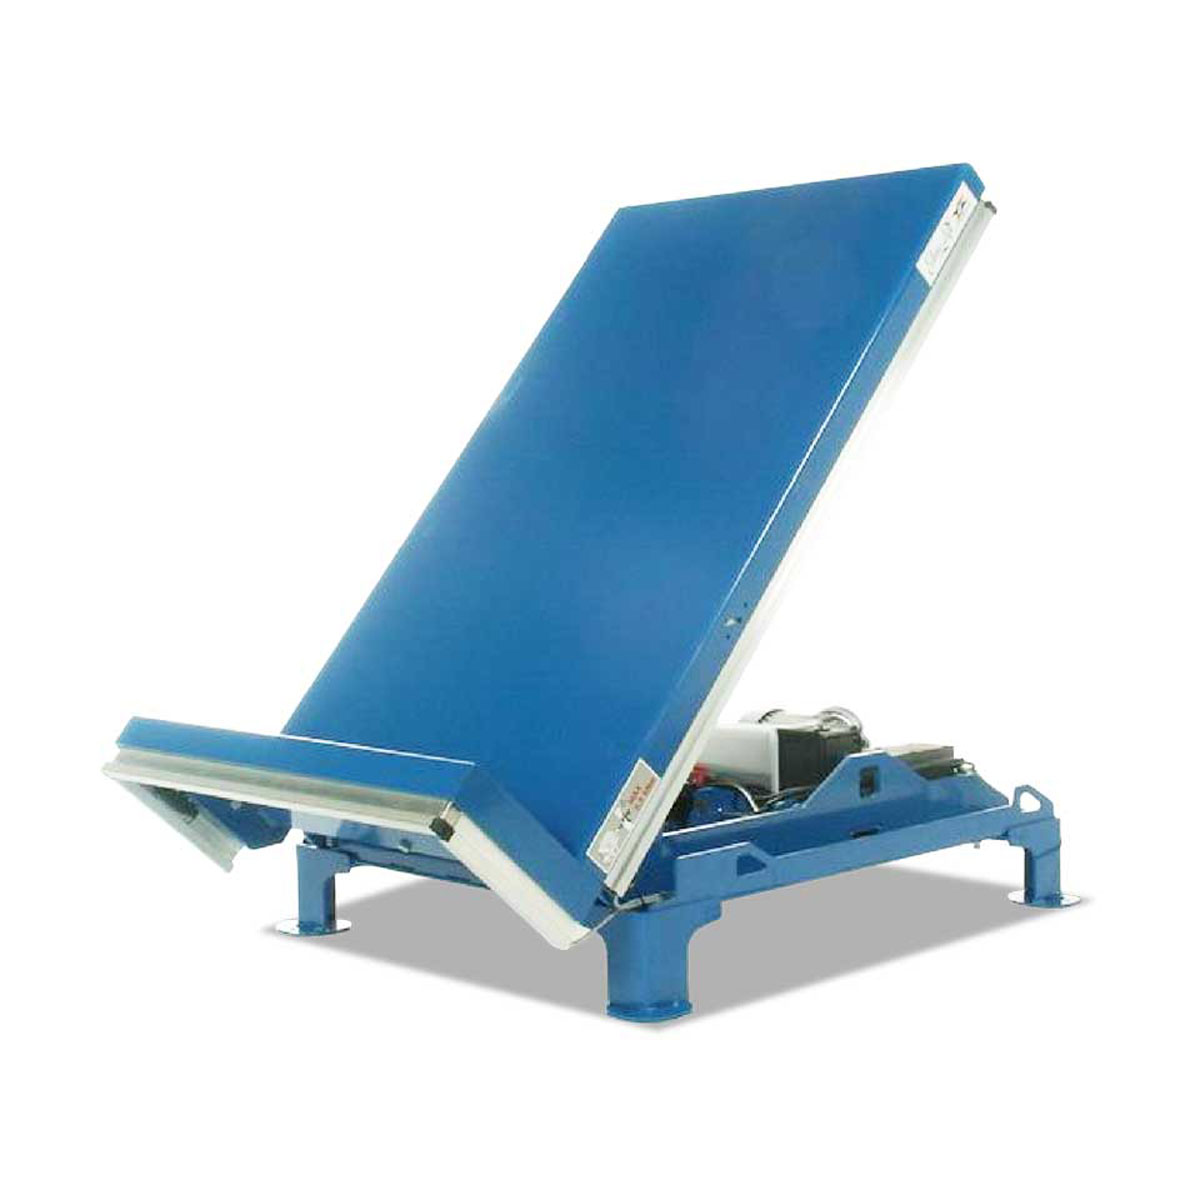 Buy Hydraulic Tilting Table  in Tilt Lift Tables from Edmolift available at Astrolift NZ